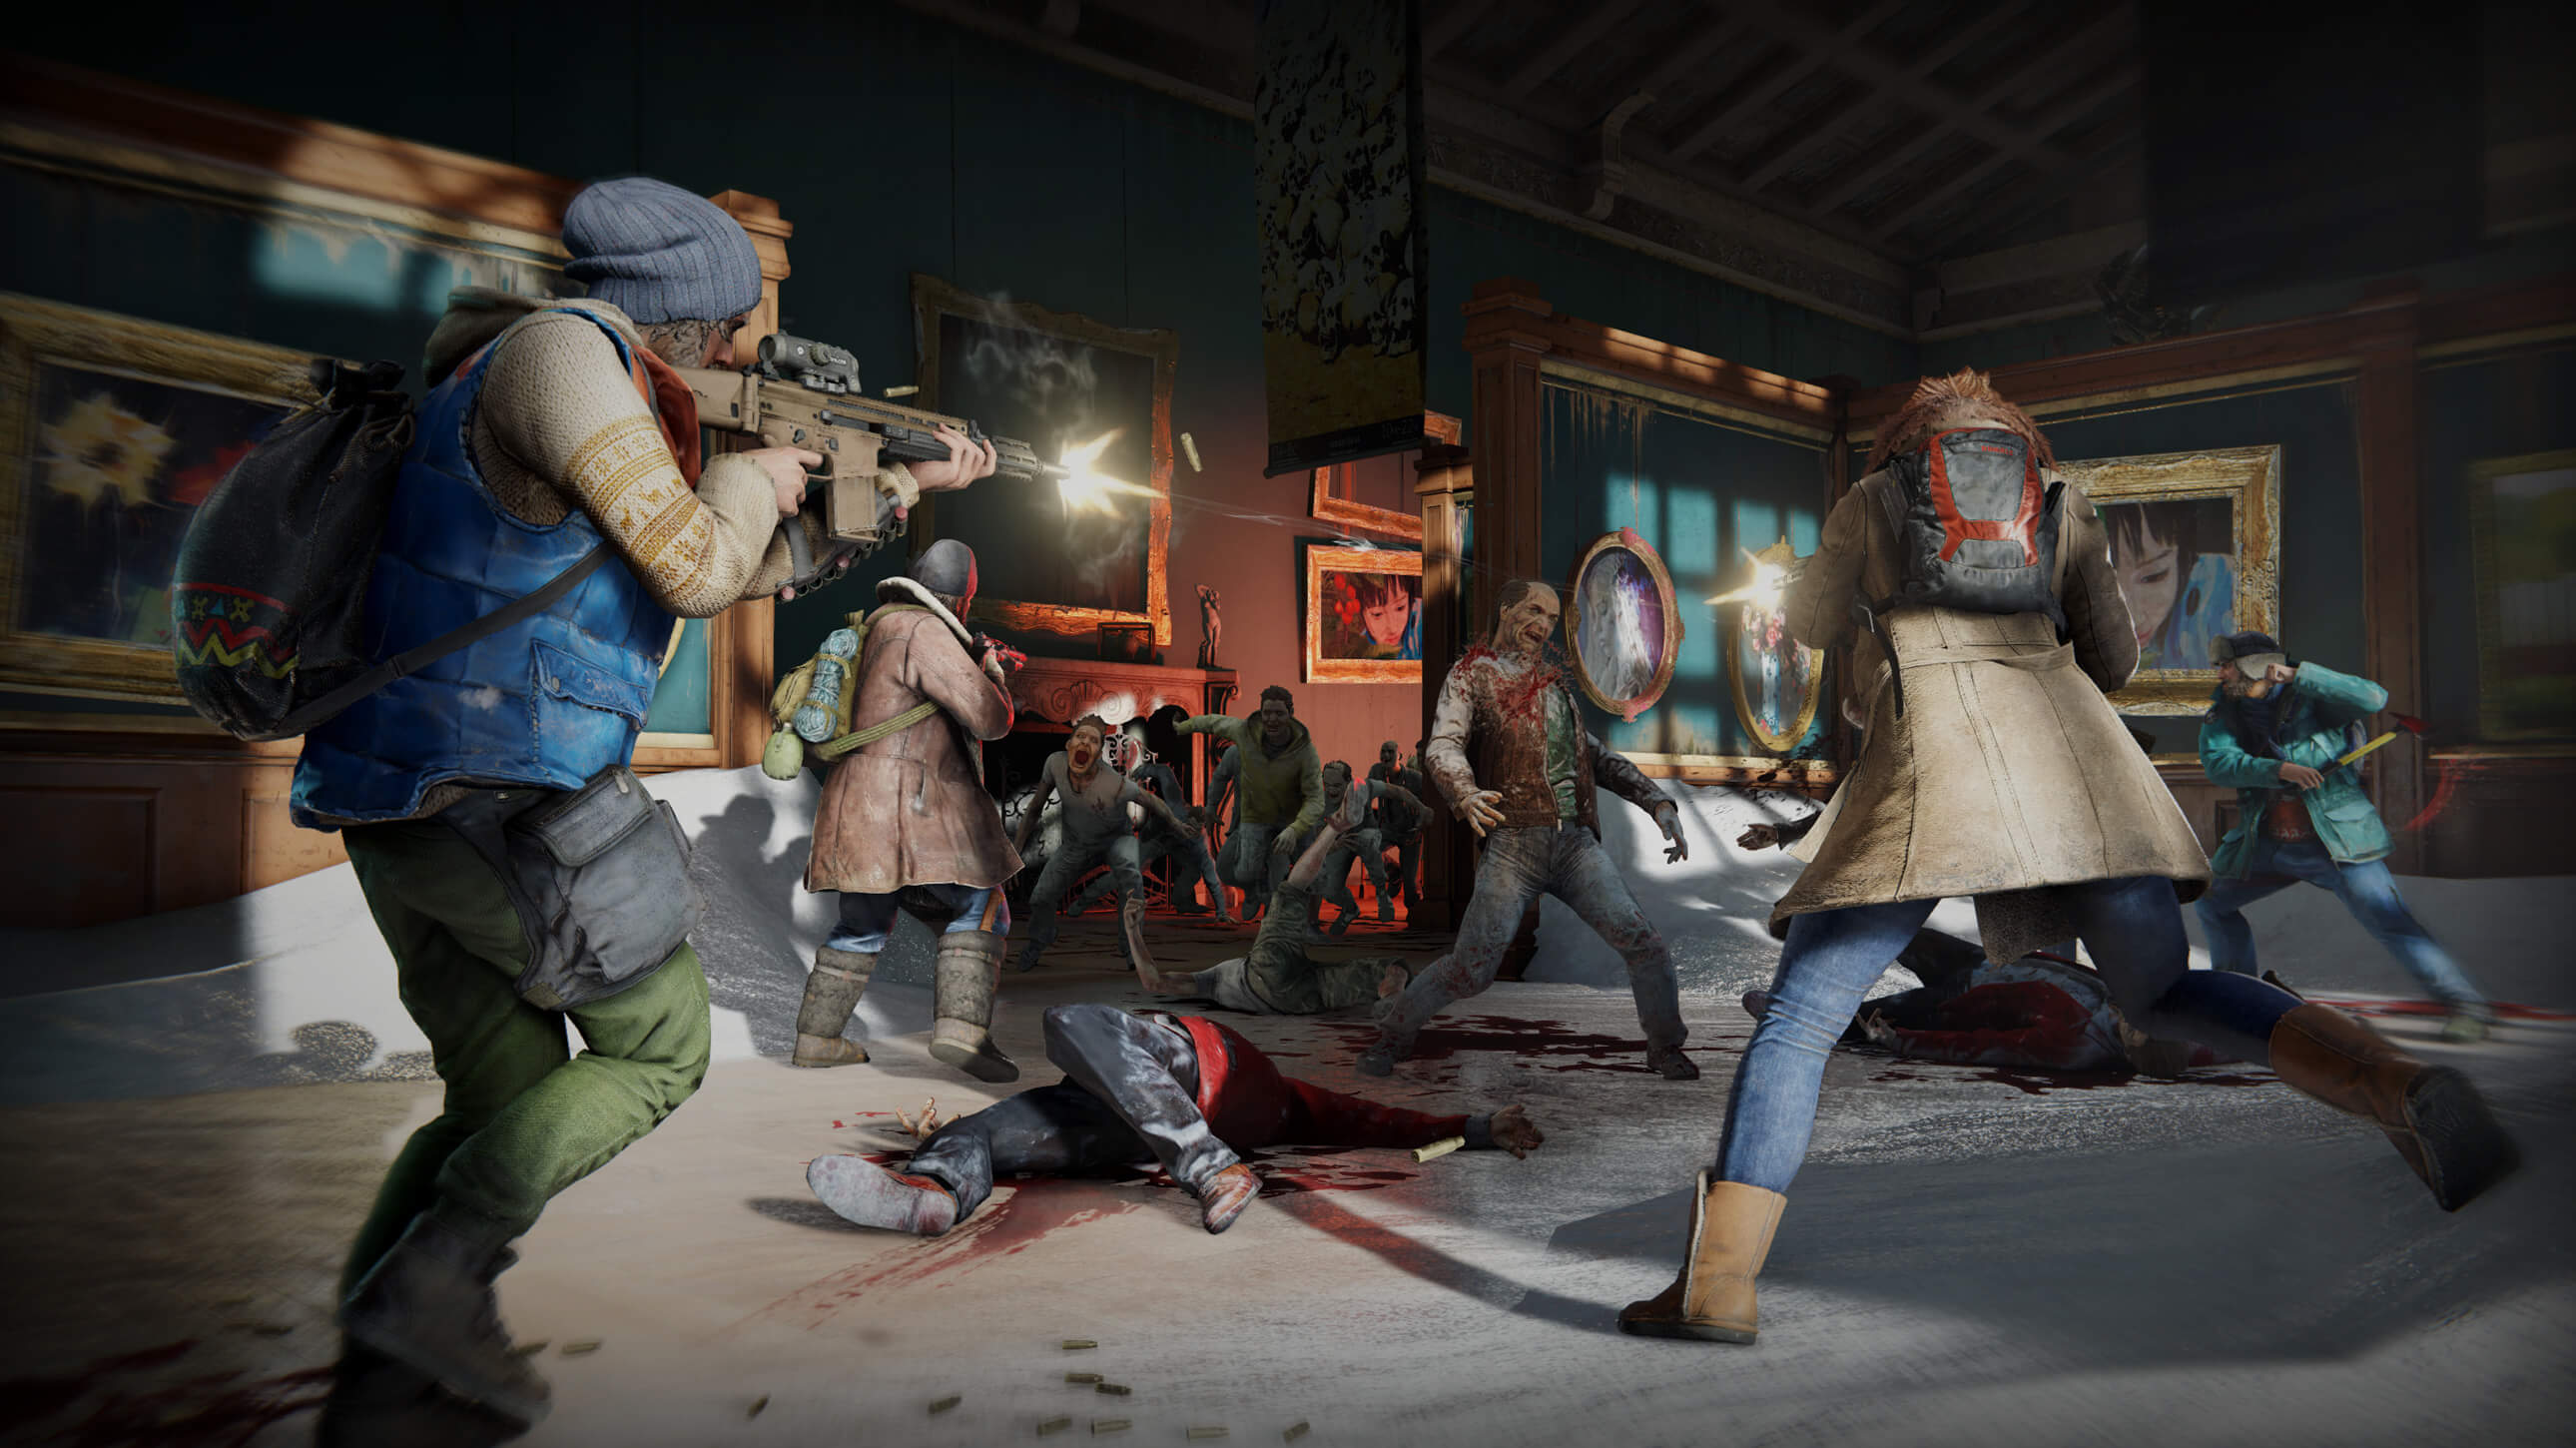 Players are mowing zombies in World War Z gameplay trailer